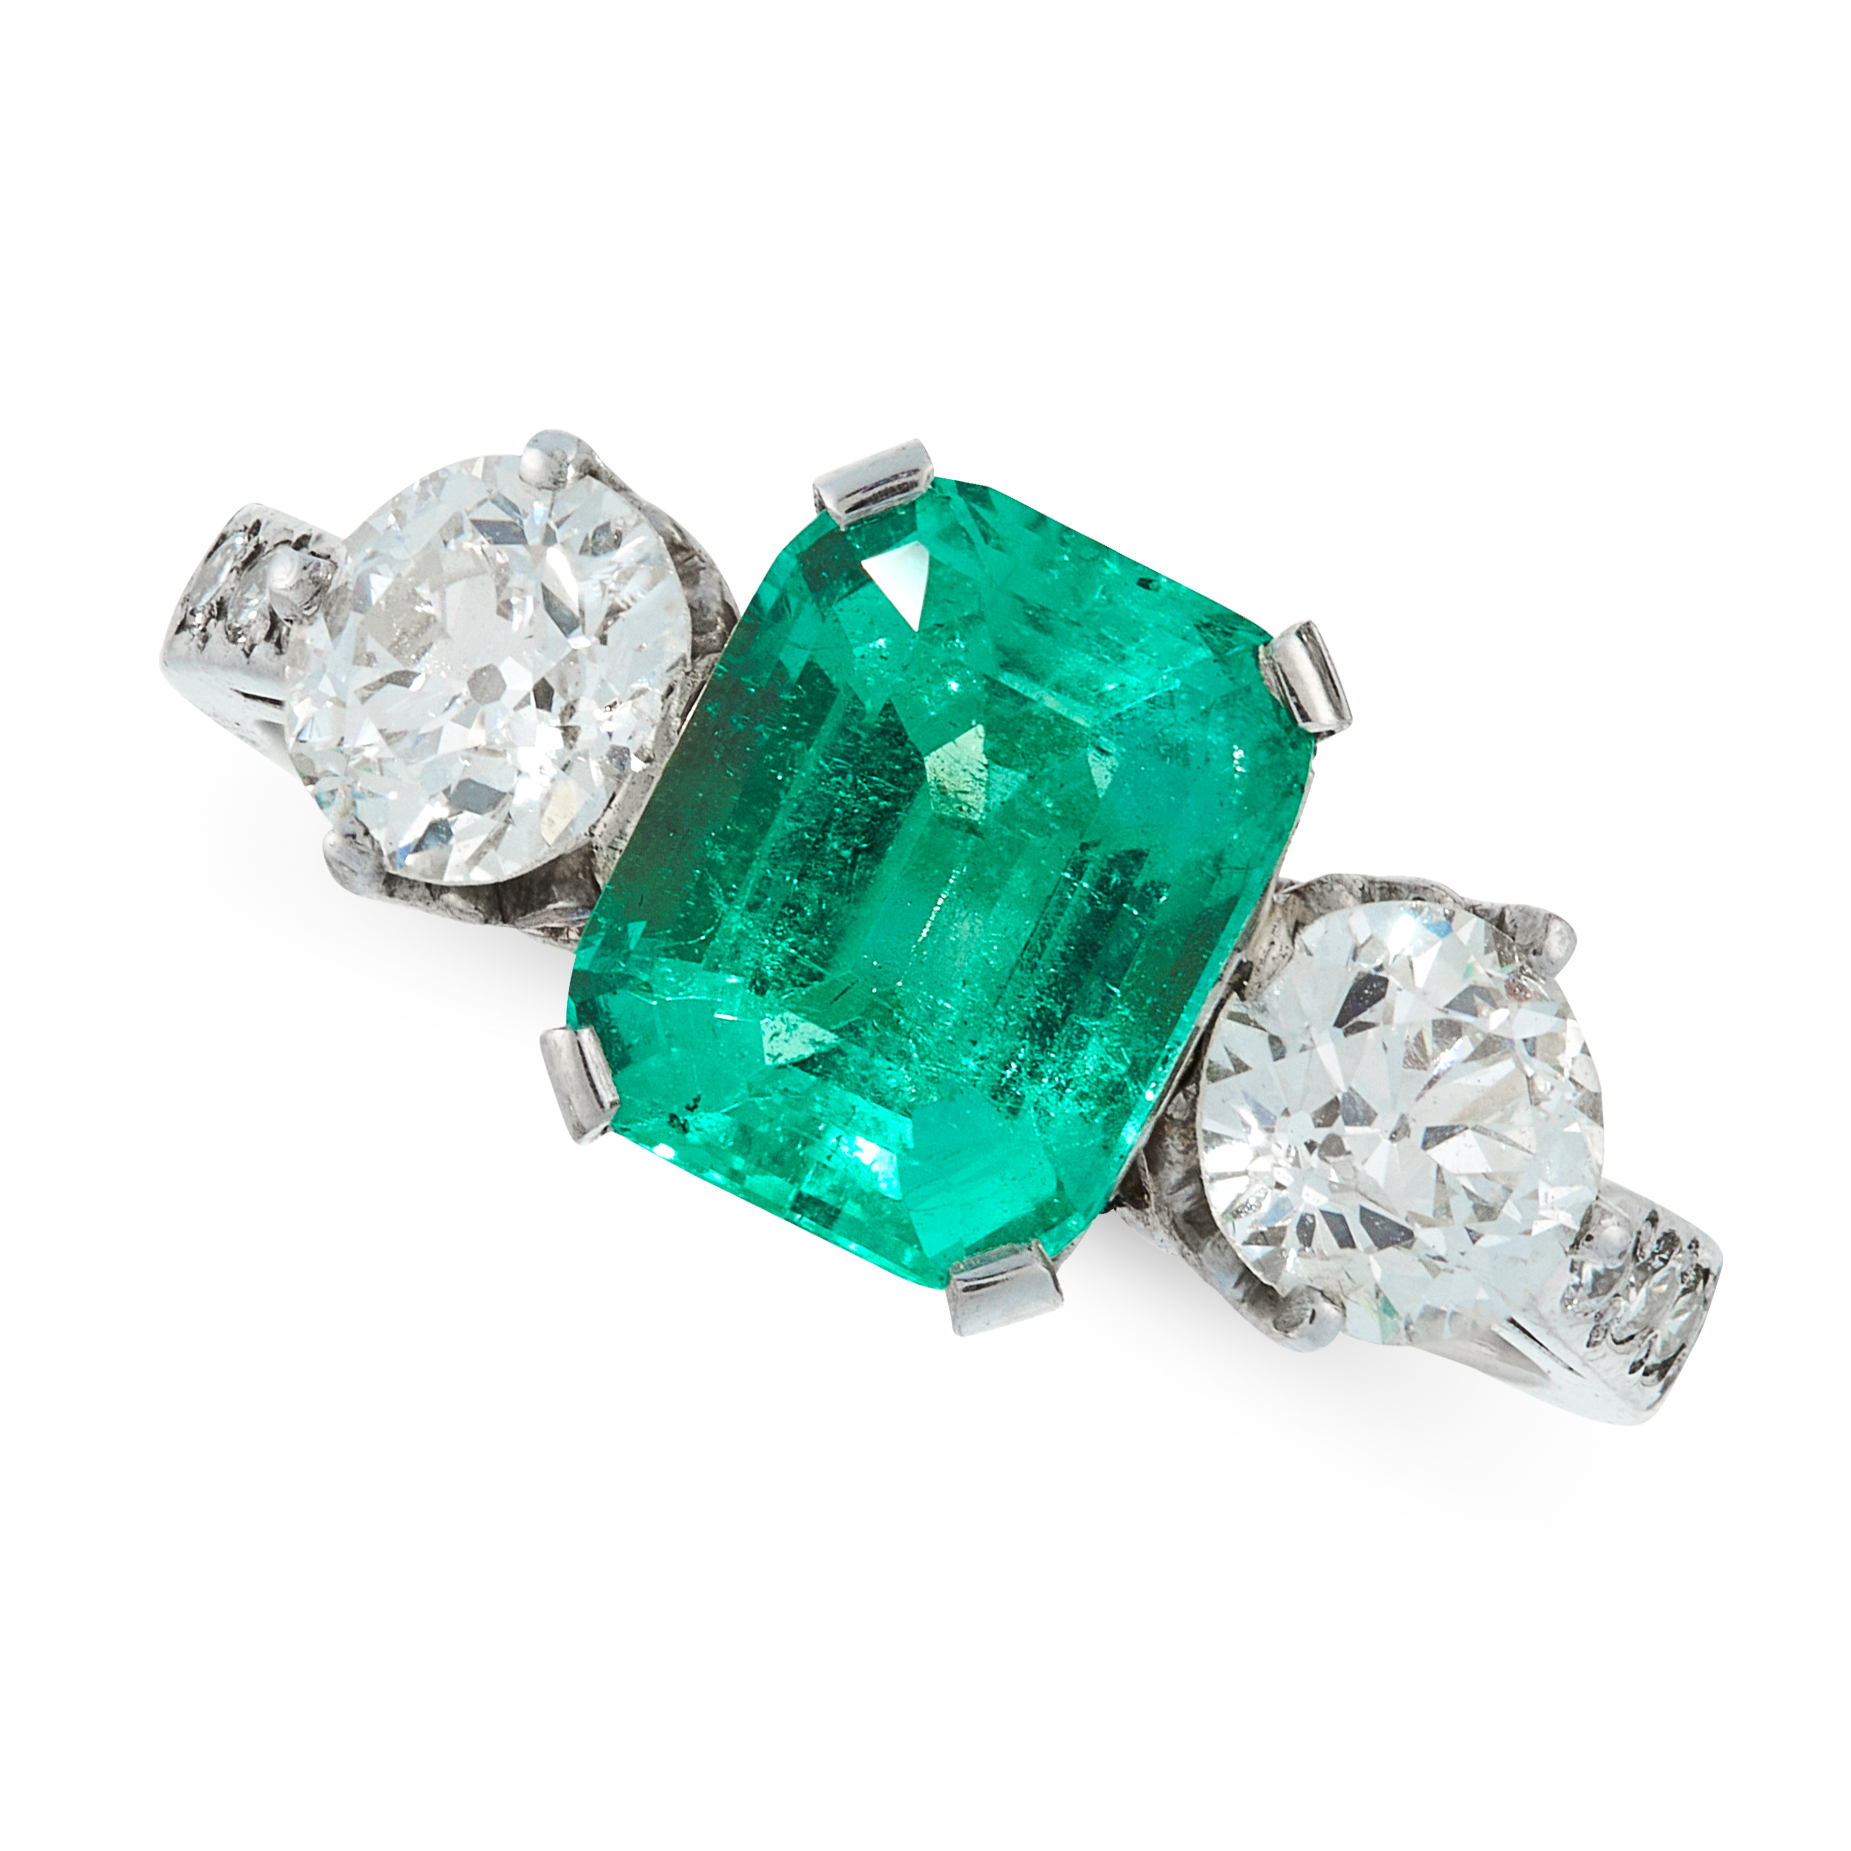 A COLOMBIAN EMERALD AND DIAMOND DRESS RING set with an emerald cut emerald of 2.01 carats, between